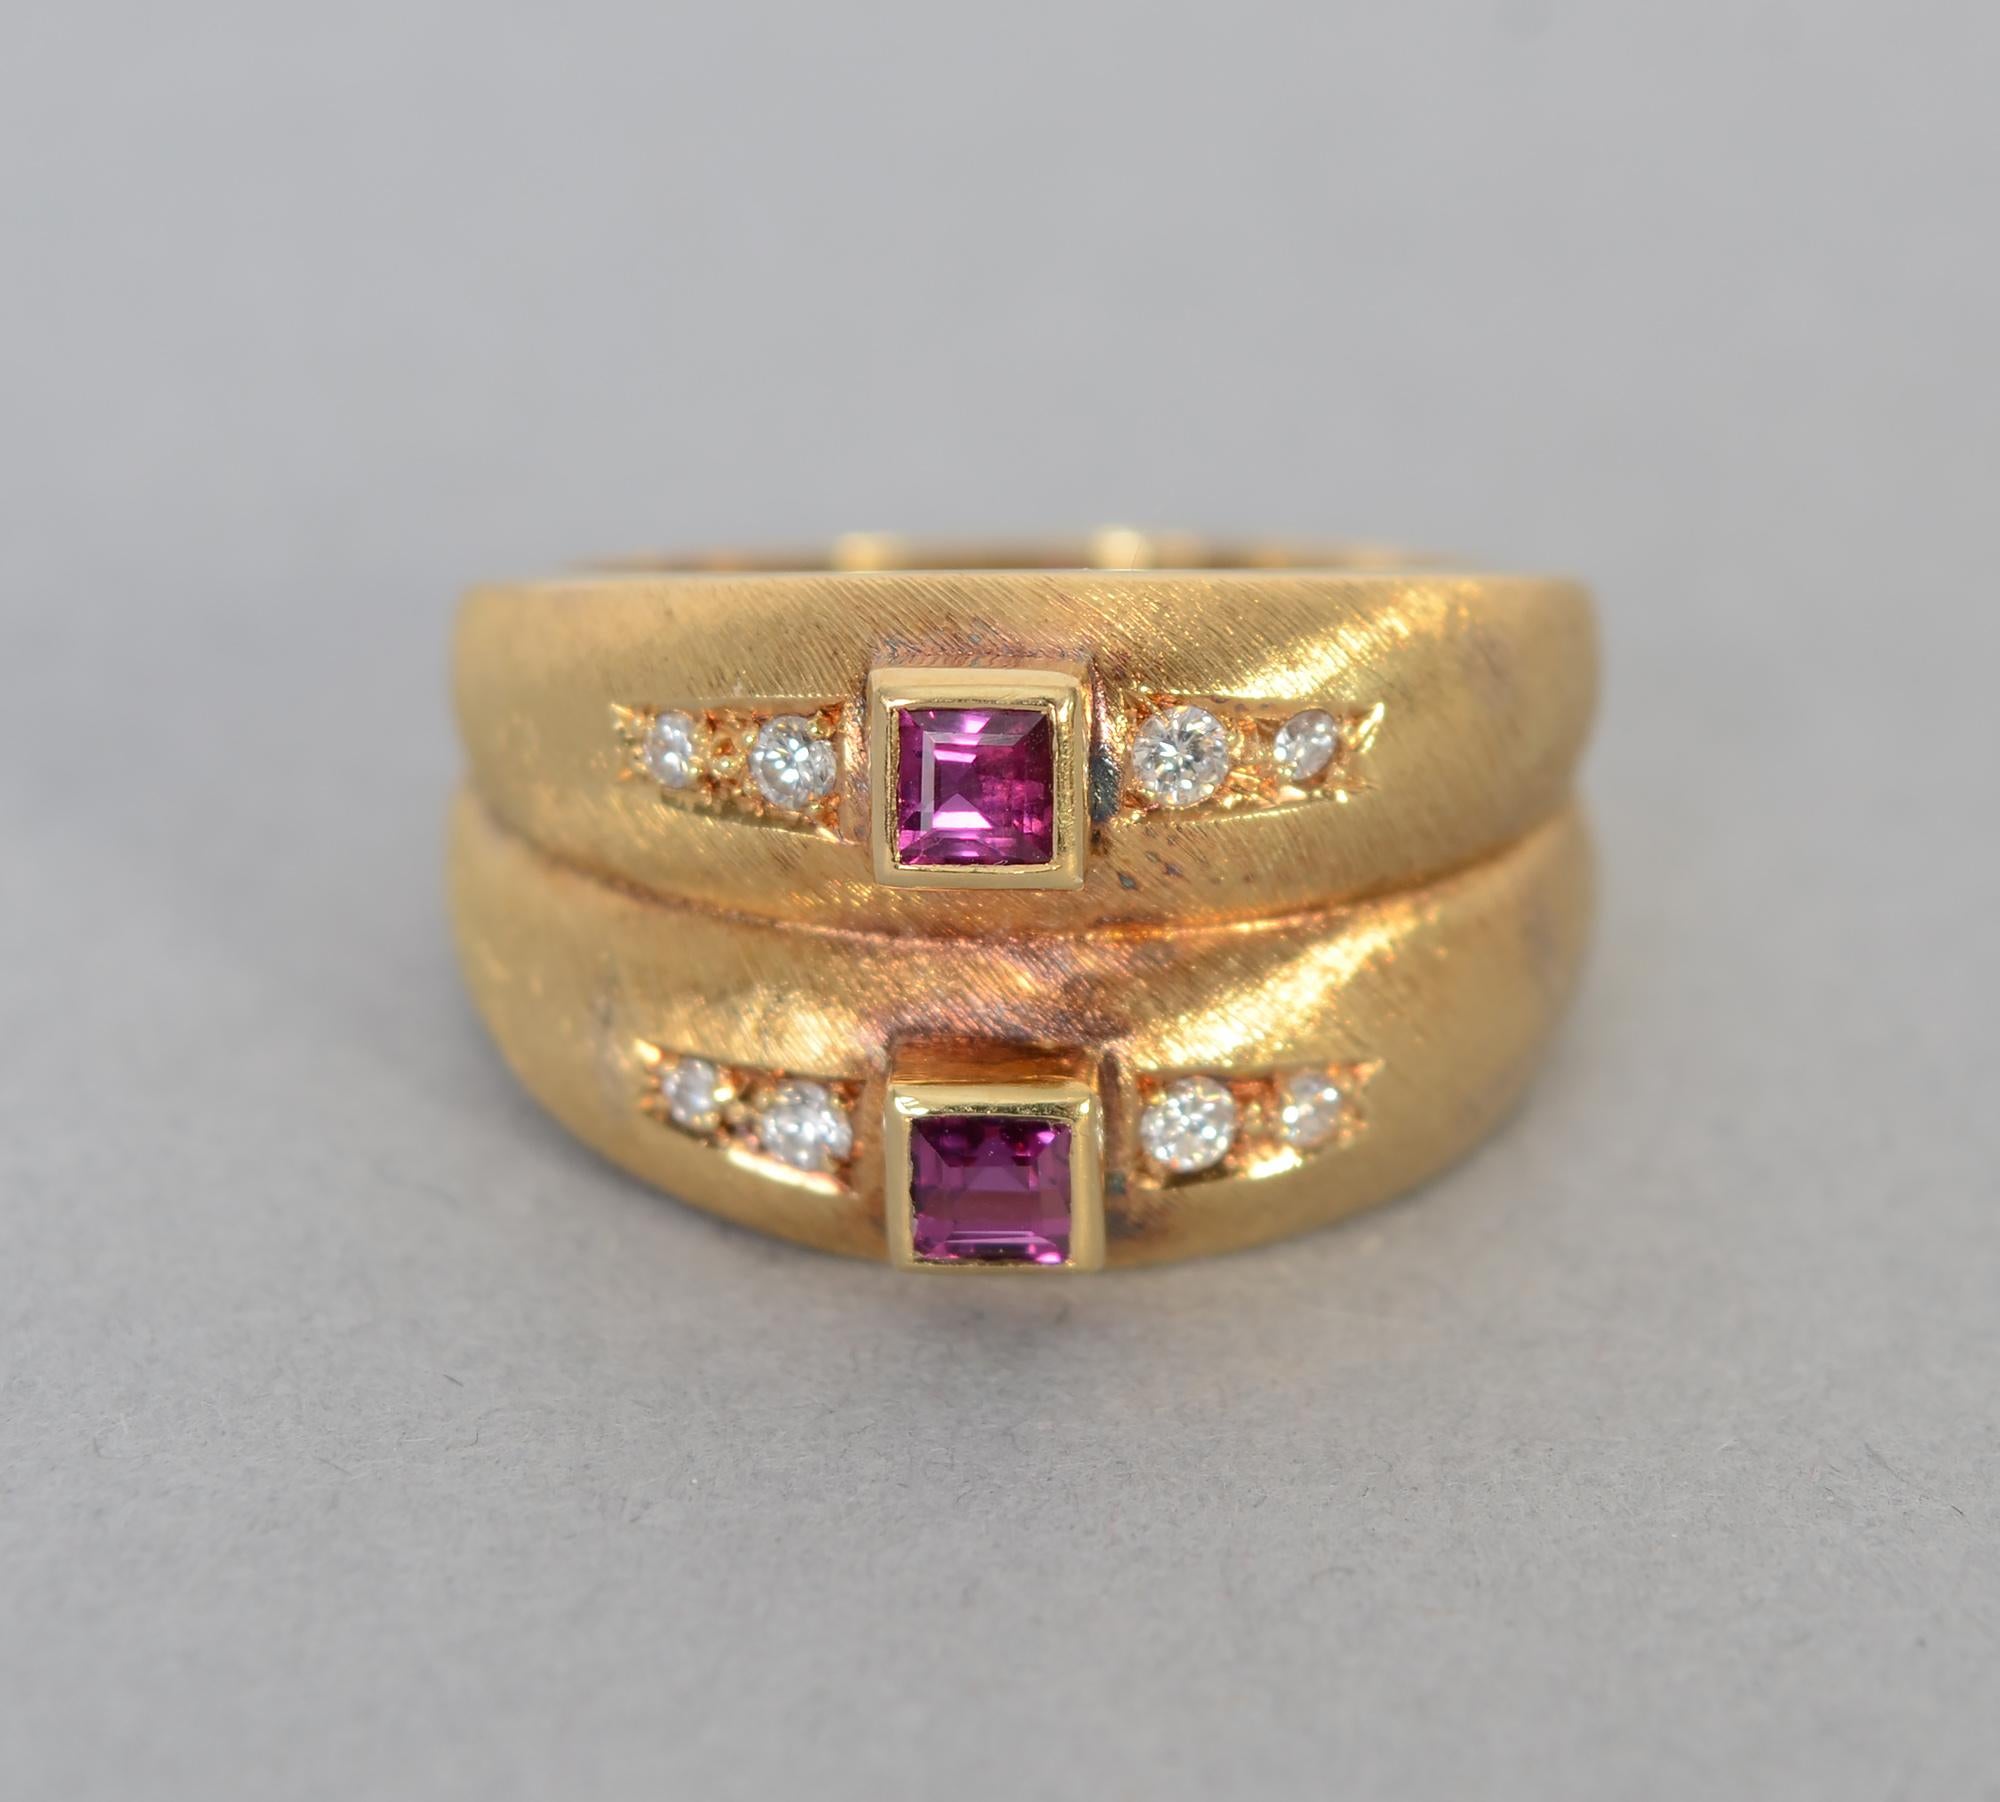 Double band ring by Burle Marx with a square tourmaline on each flanked by four diamonds. The stones are the fine quality for which Burle Marx is known. The gold has the fine brushed finish he often used.   
The ring is size 8 and can be sized up or